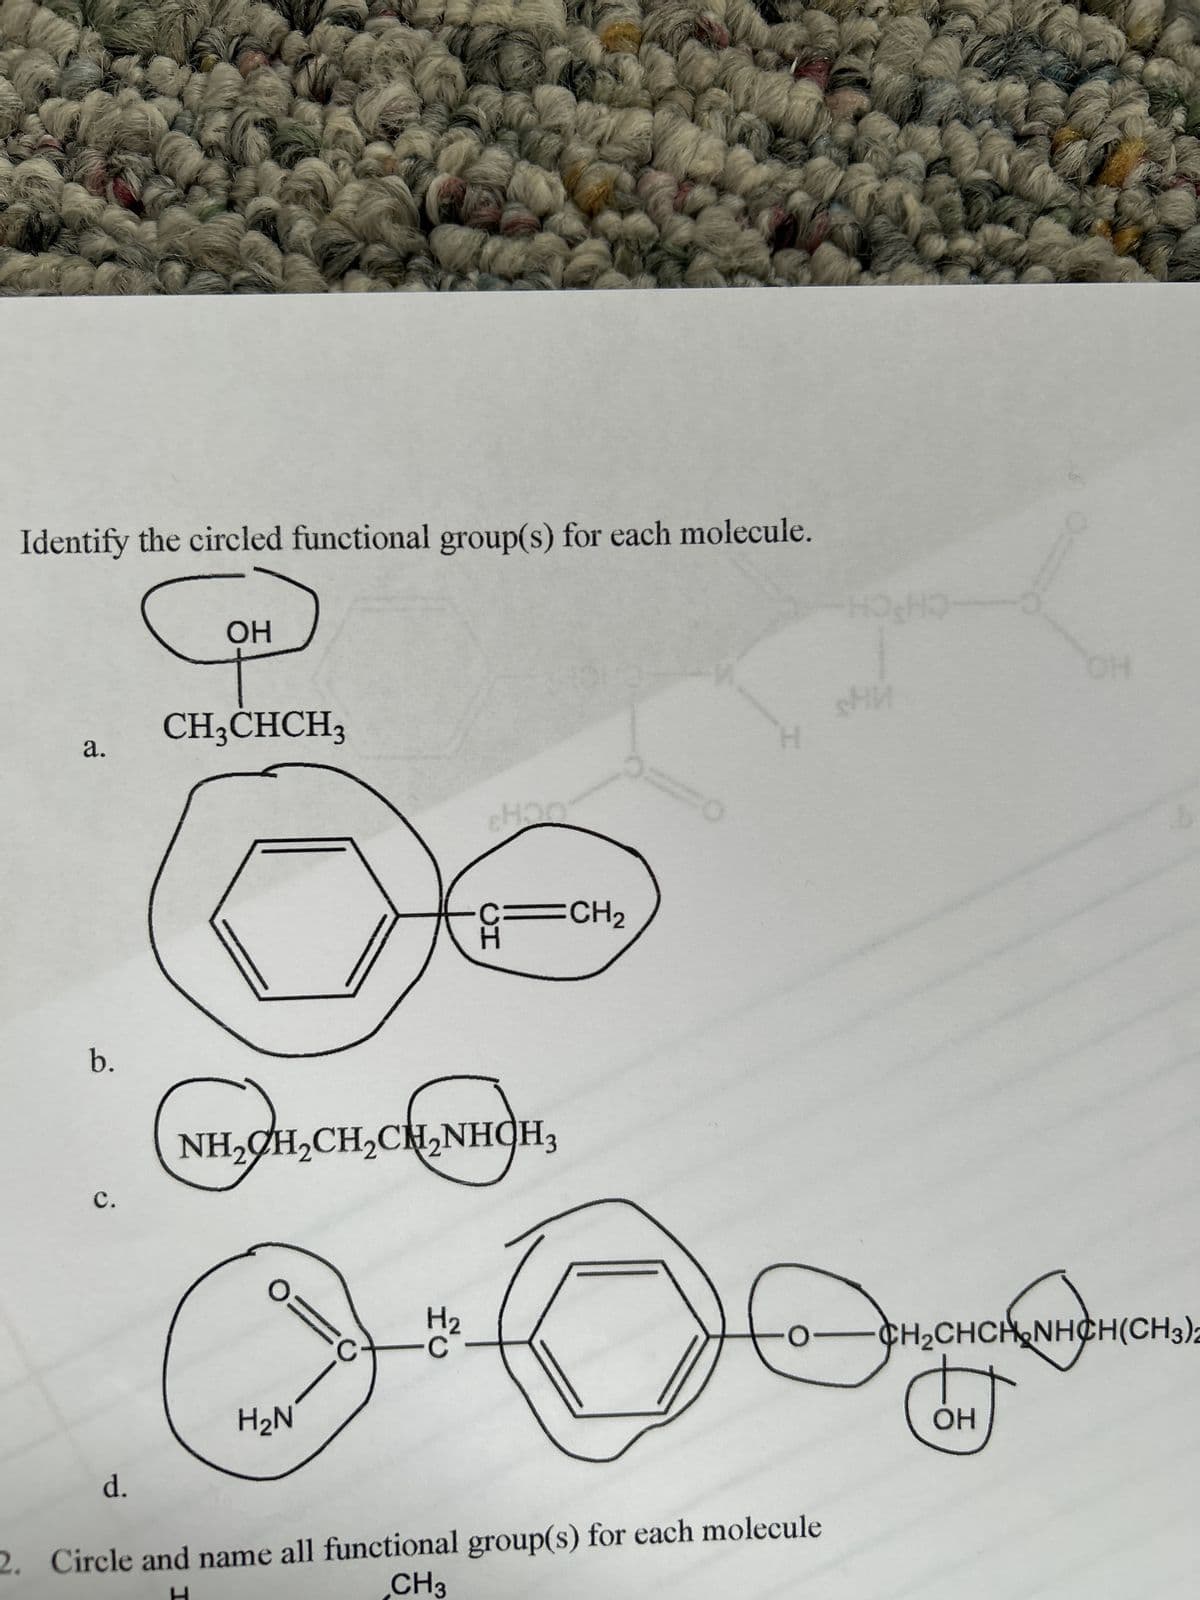 Identify the circled functional group(s) for each molecule.
OH
CH3CHCH3
a.
ΙΟ
——CH2
b.
NH2CH2CH2CH2NHCH3
C.
H₂N
d.
0
Circle and name all functional group(s) for each molecule
CH3
HO
OH
SH
CH2CHCH NHCH(CH3)2
OH